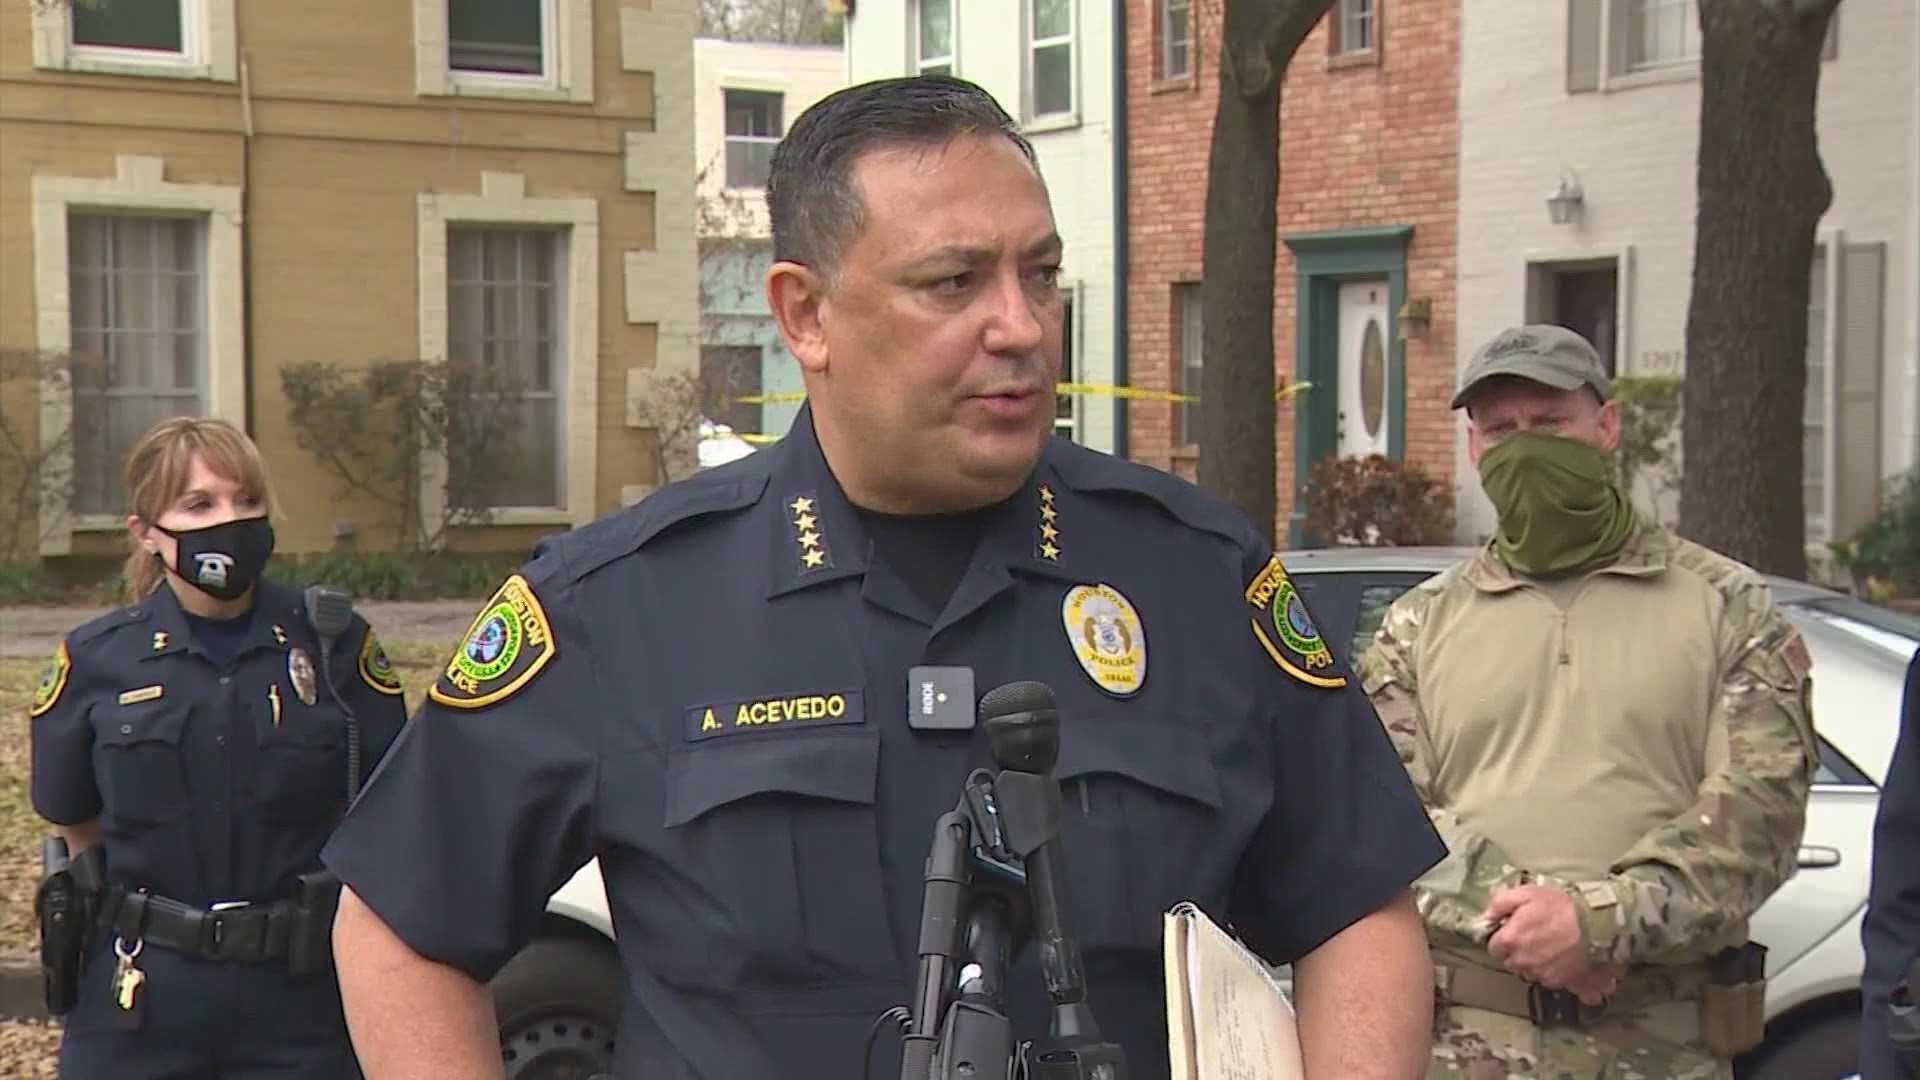 Chief Art Acevedo is leaving the Houston Police Department to become the Chief of Police in Miami, KHOU has learned.